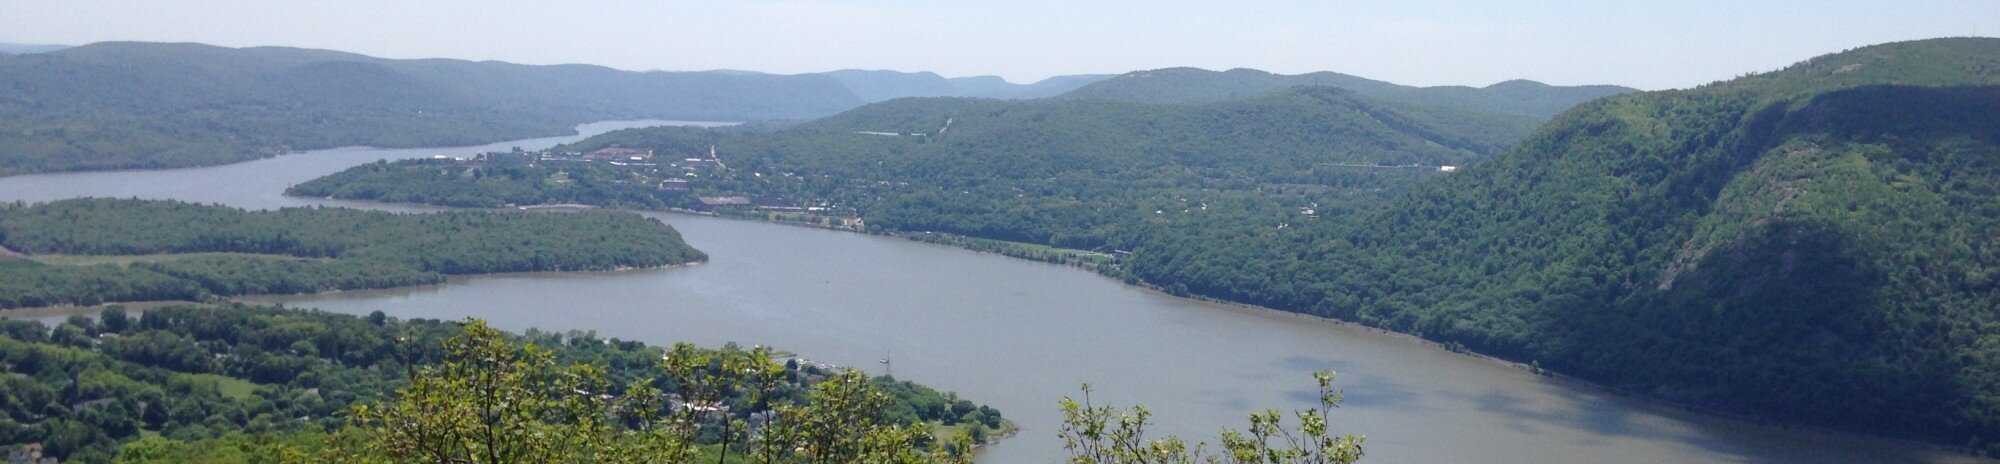 Breakneck Ridge, Hudson Highlands with views of Storm King Mountain